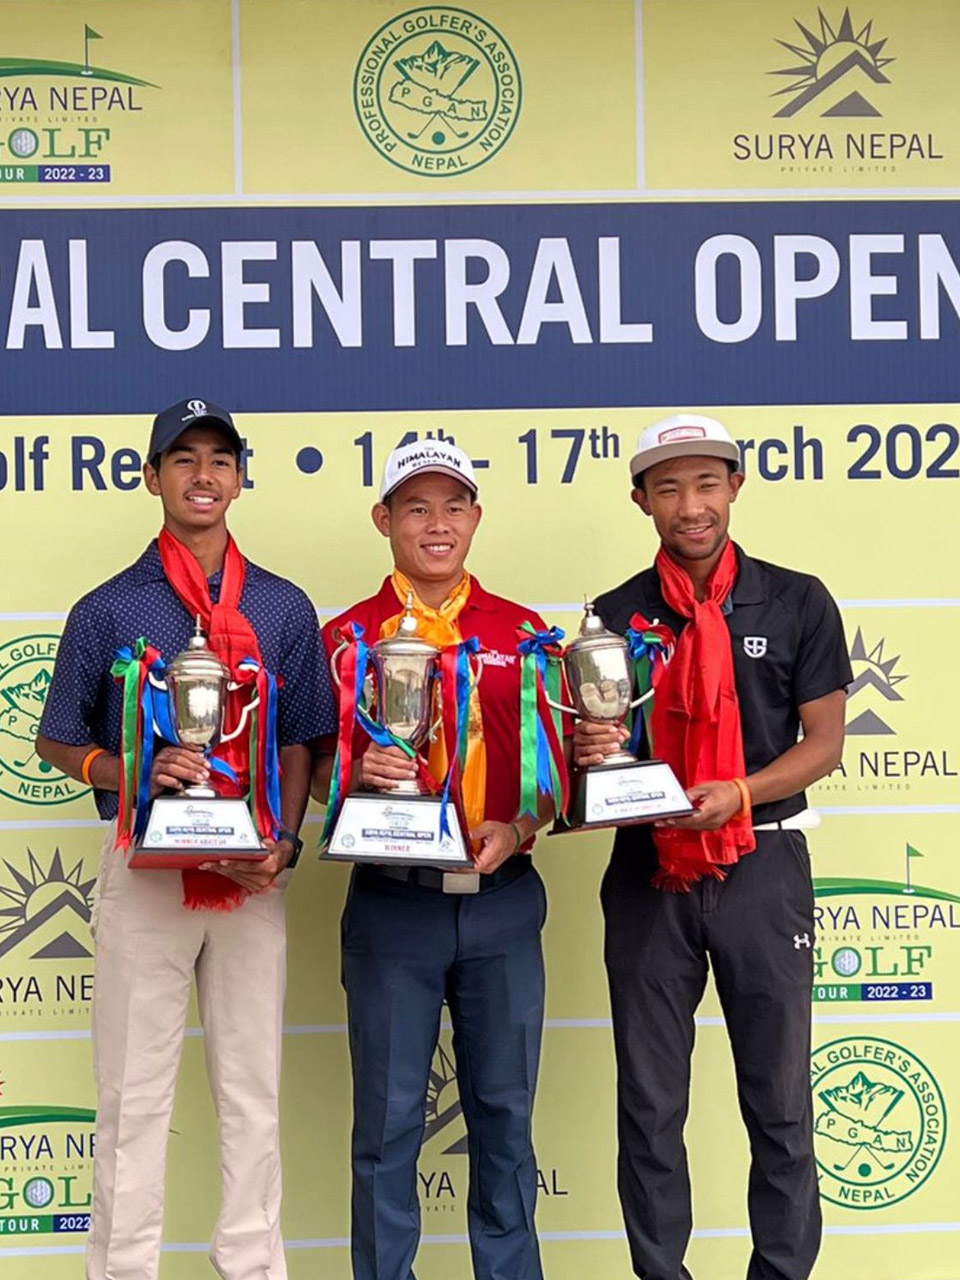 Subhash Tamang finishes 2nd at the Surya Nepal Central Open